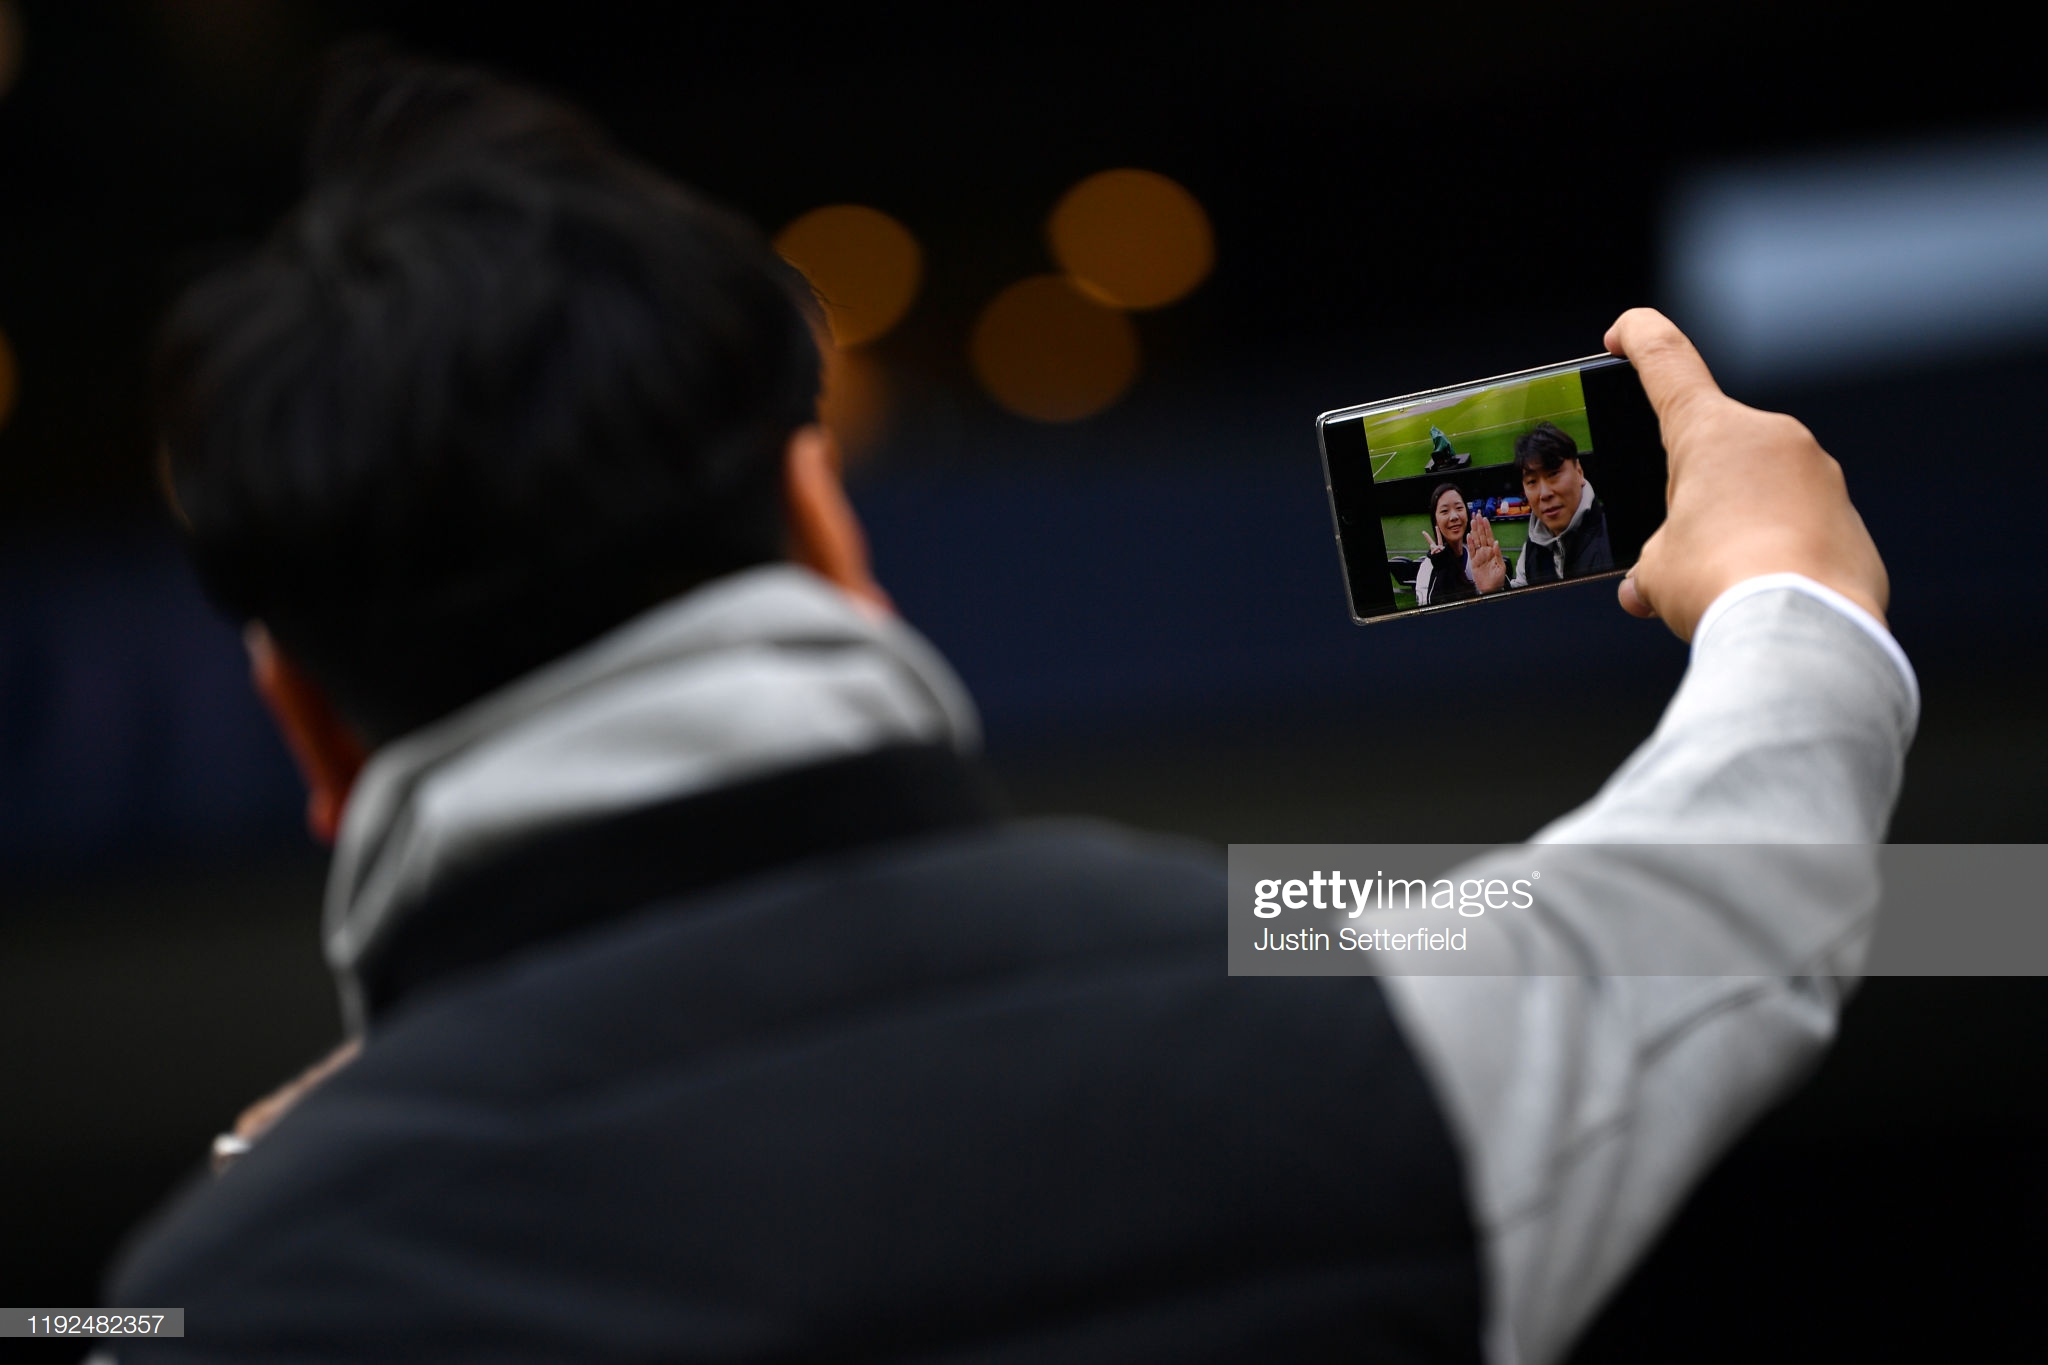 gettyimages-1192482357-2048x2048.jpg